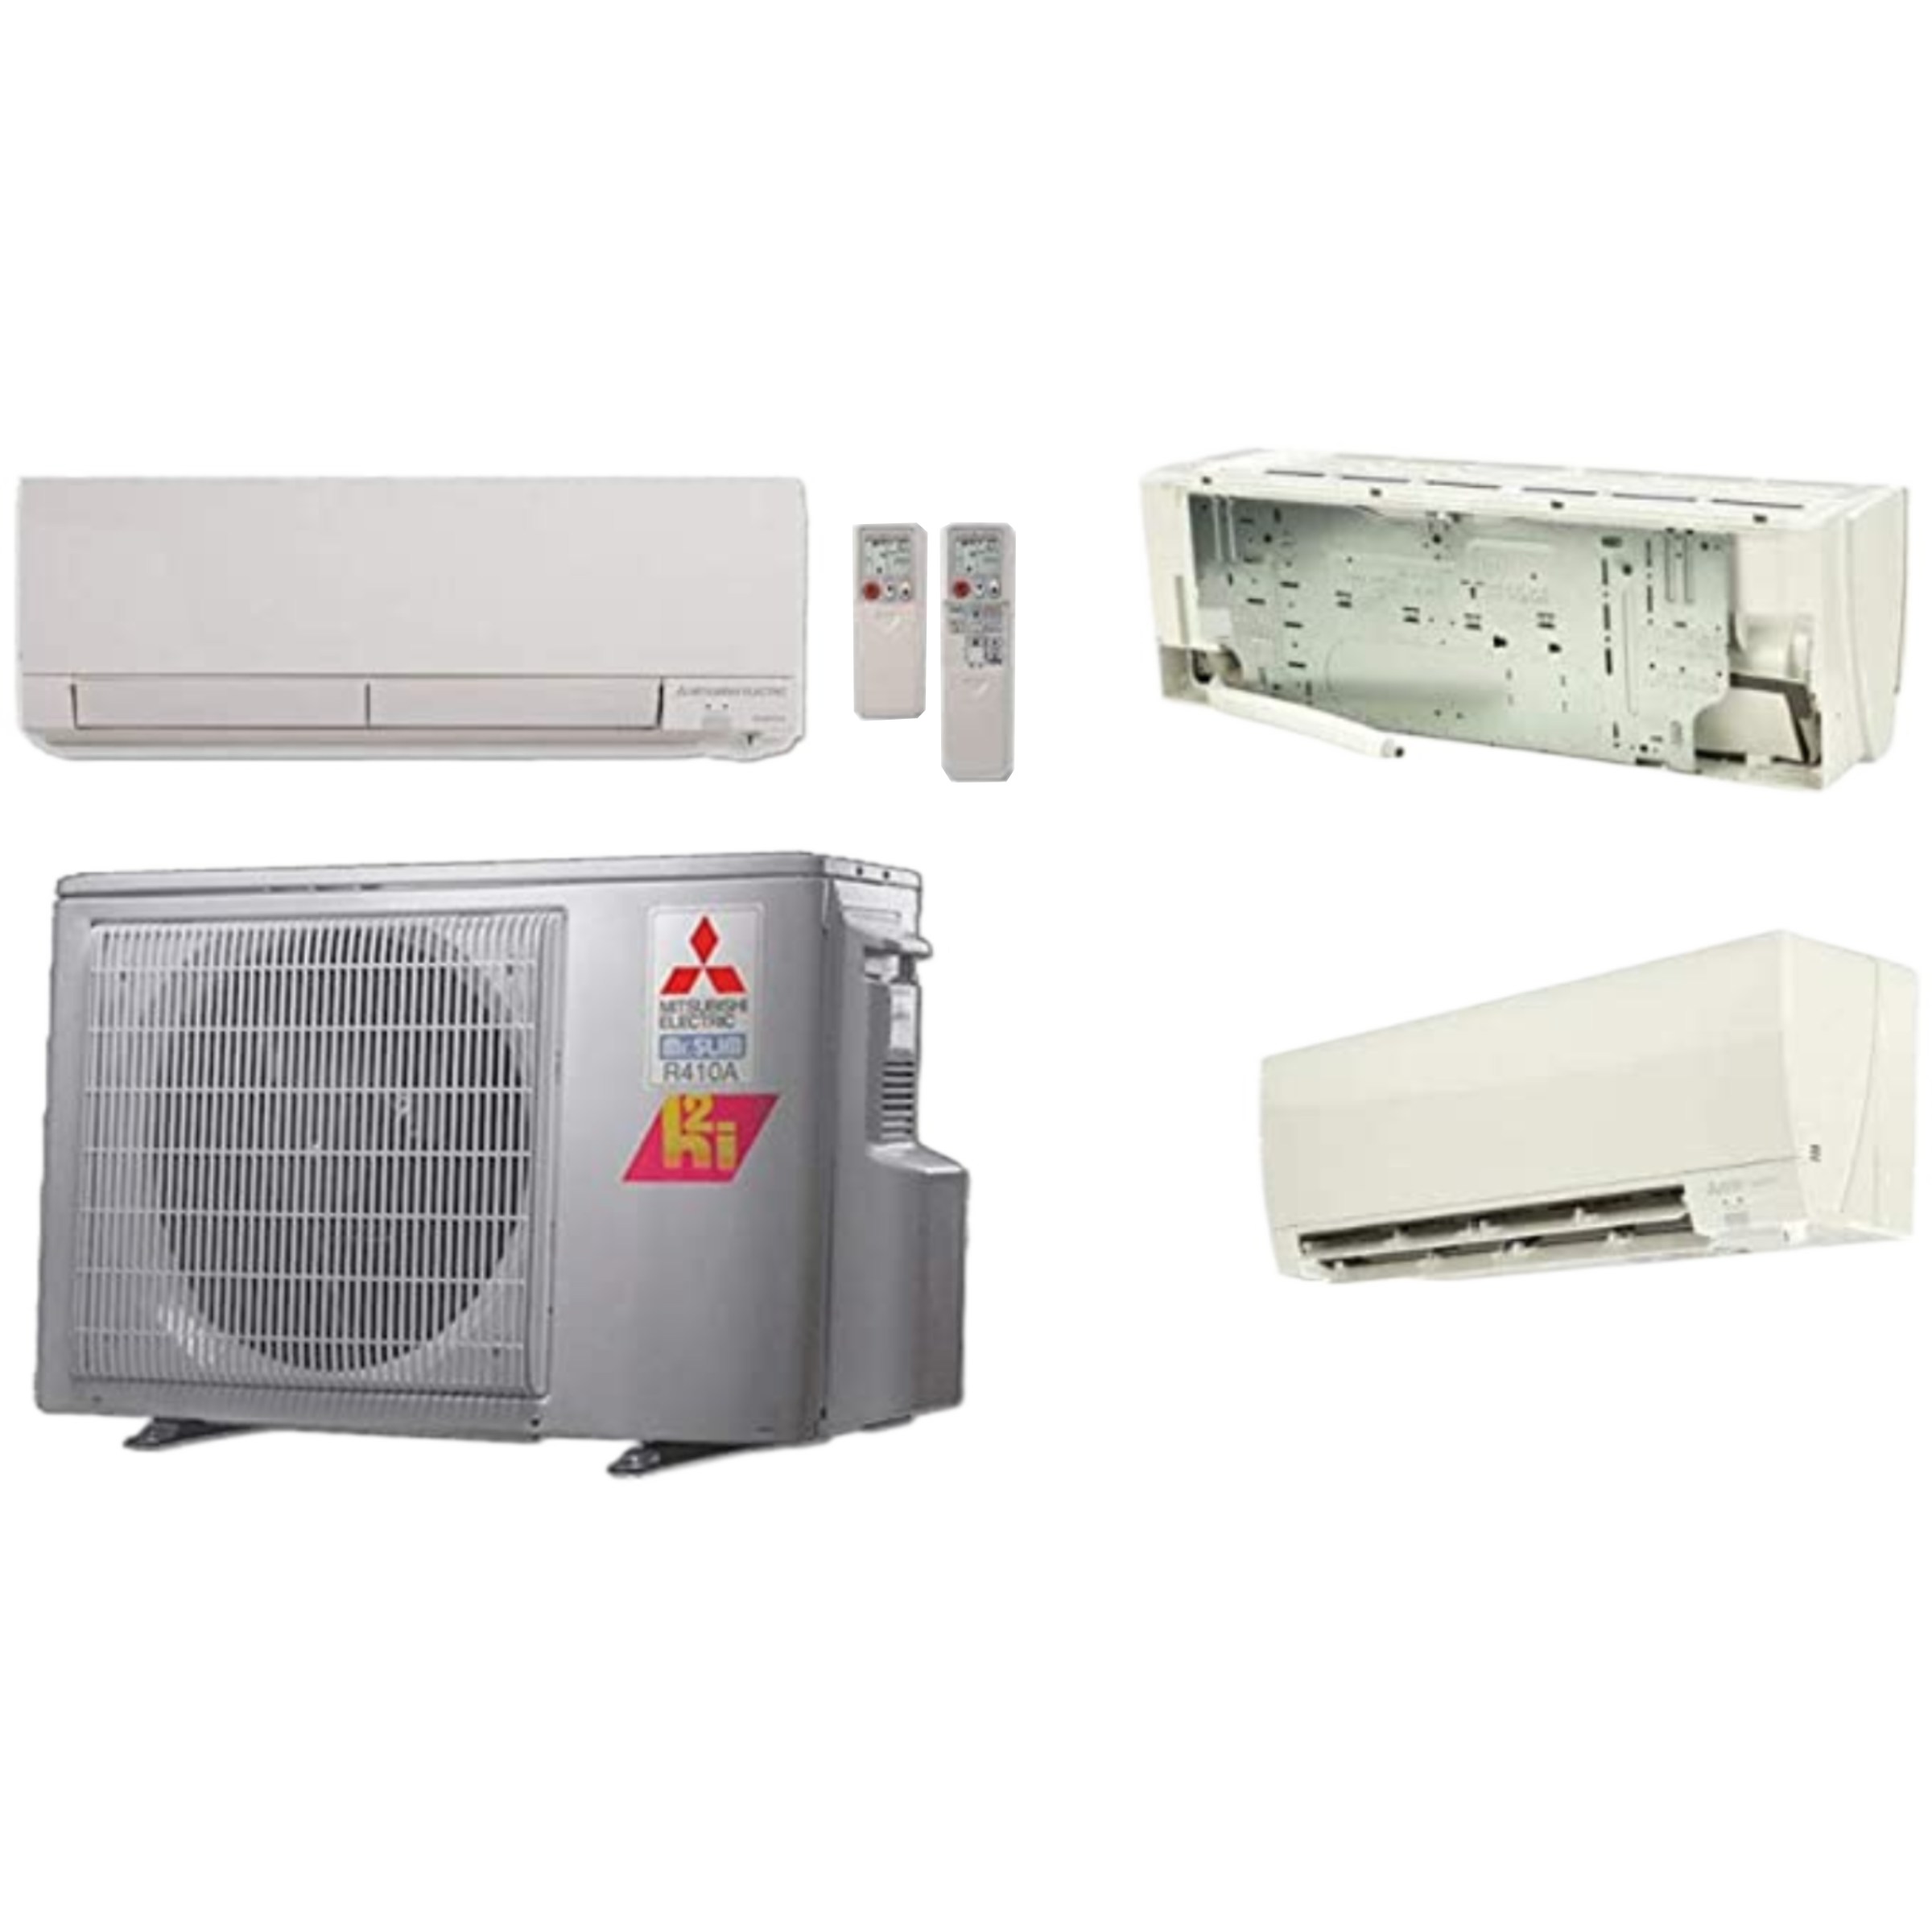 Mitsubishi FH-Series  30.5 SEER Single-Zone Ductless Split System Wall Mounted Heat Pump Air Conditioner  9000  BTU, 230V, R-410A